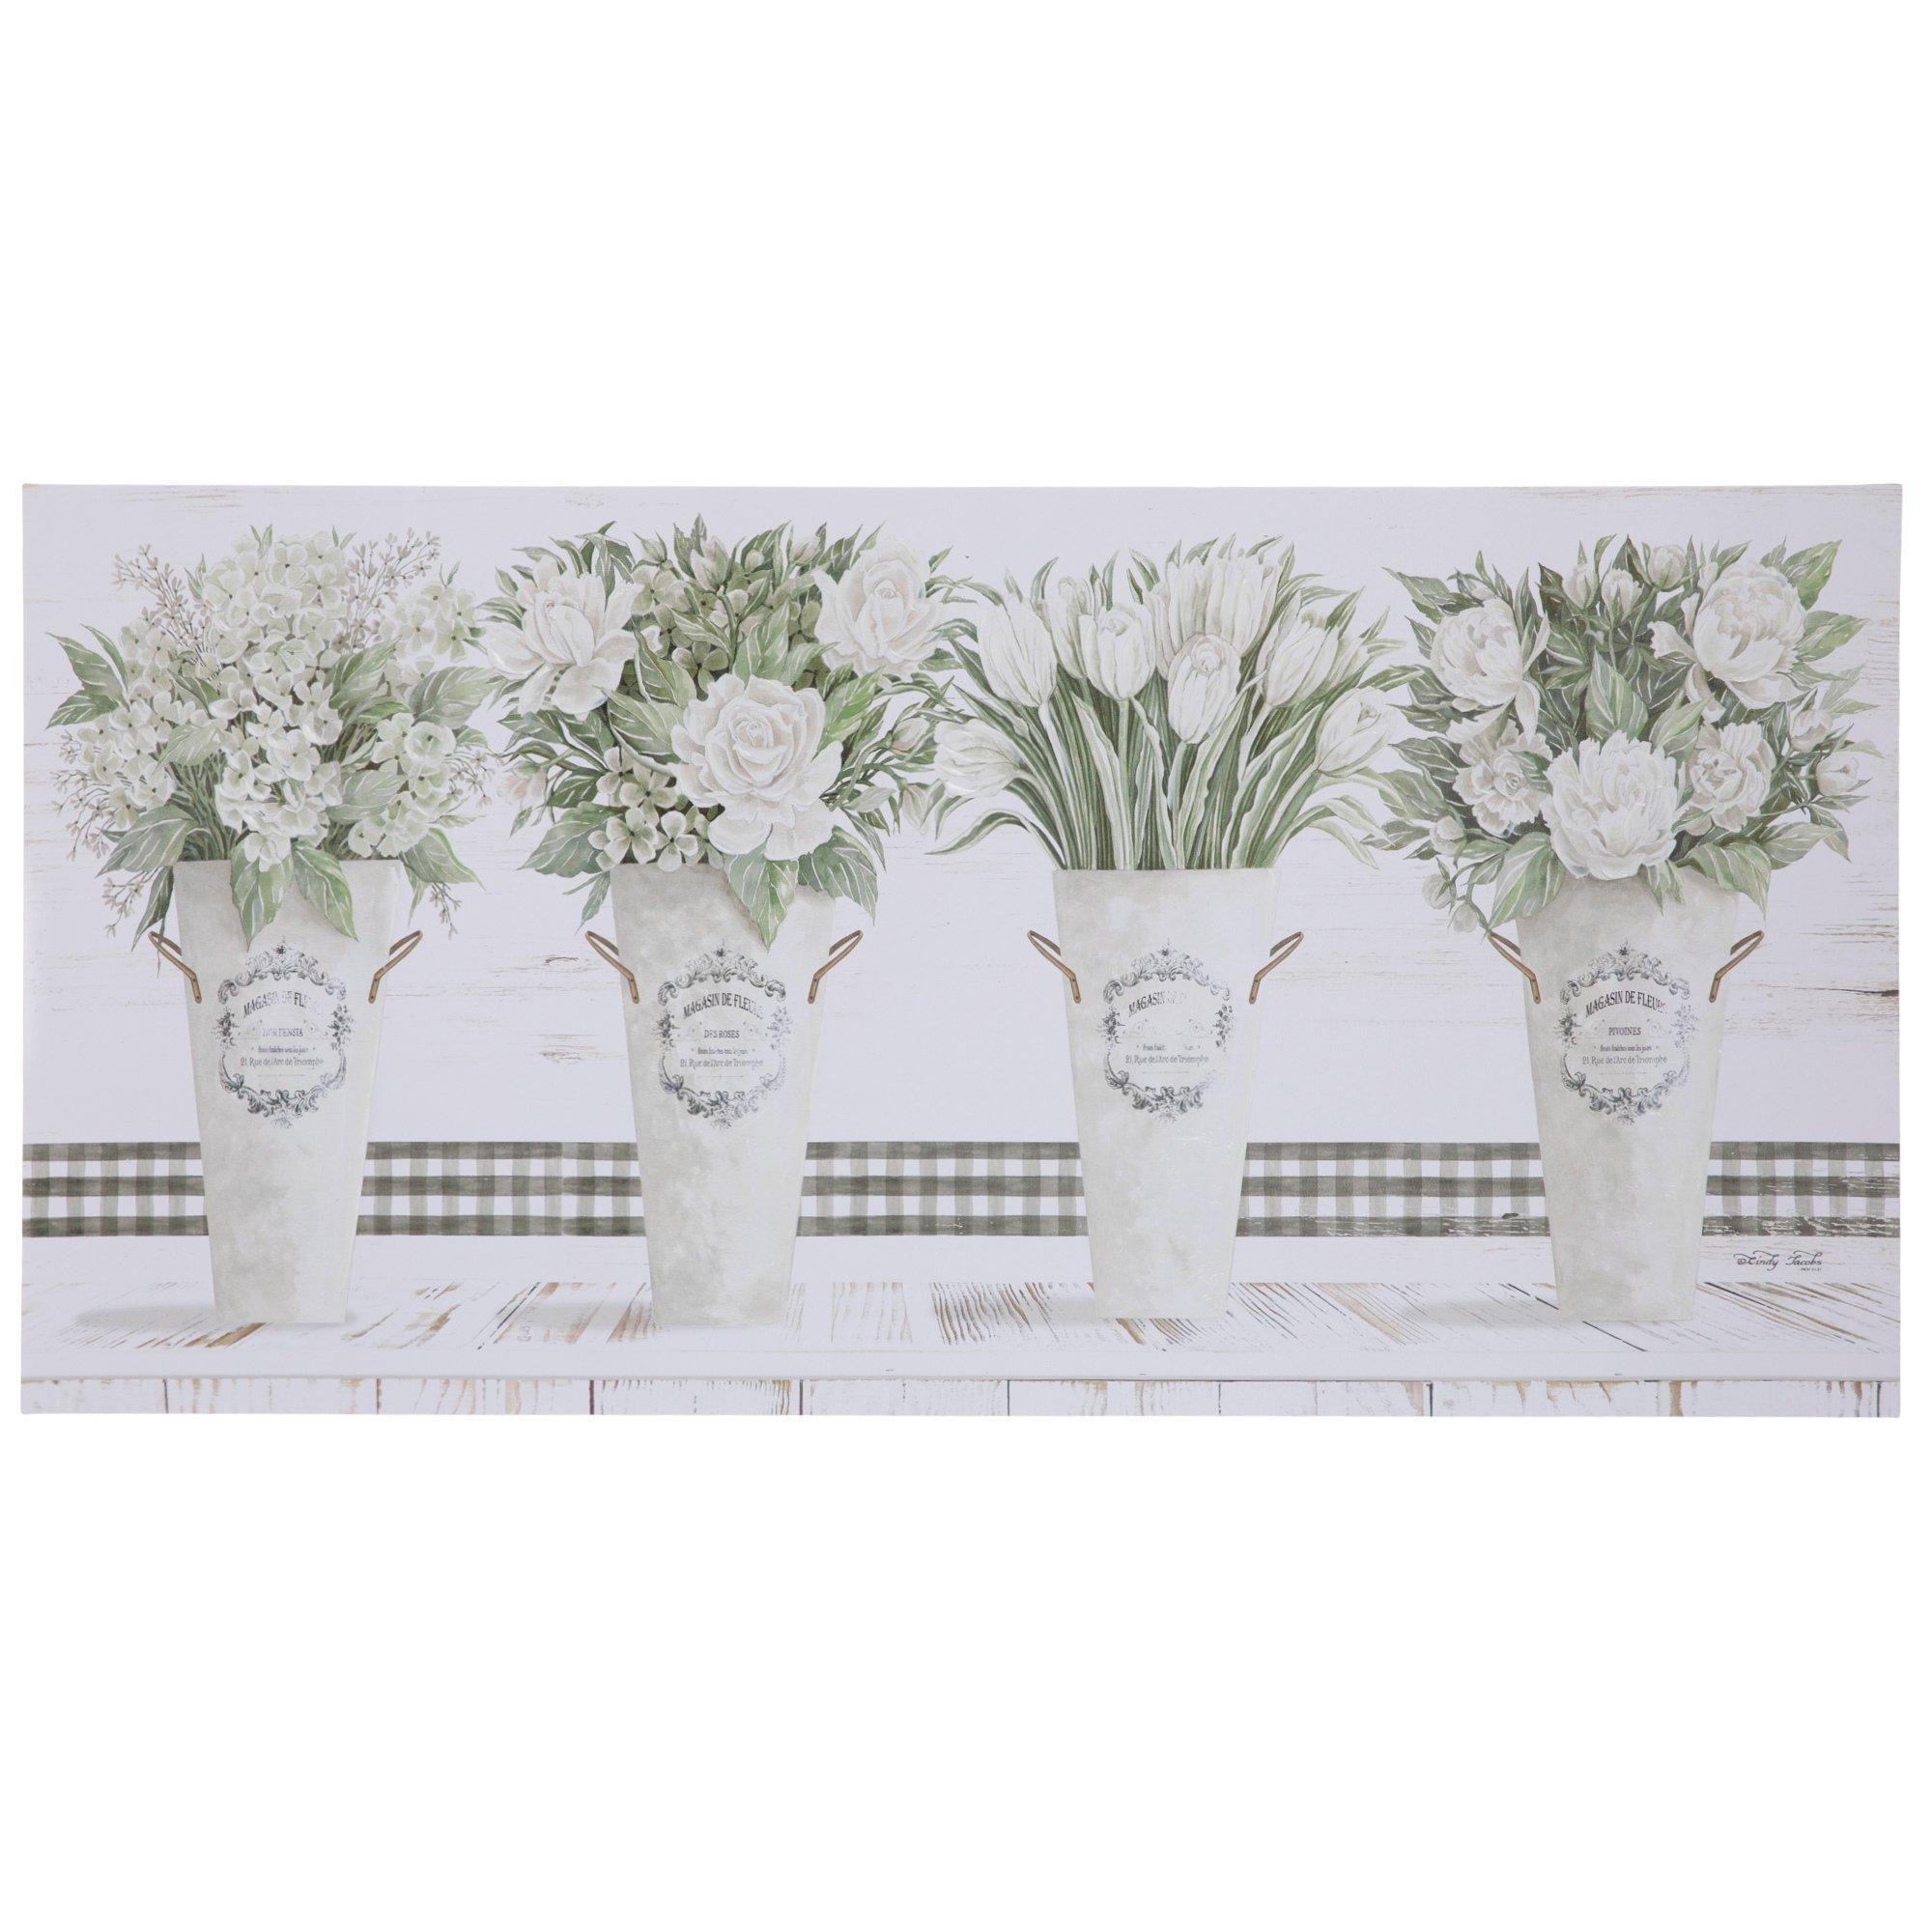 White Picture Hanging Strips - Large, Hobby Lobby